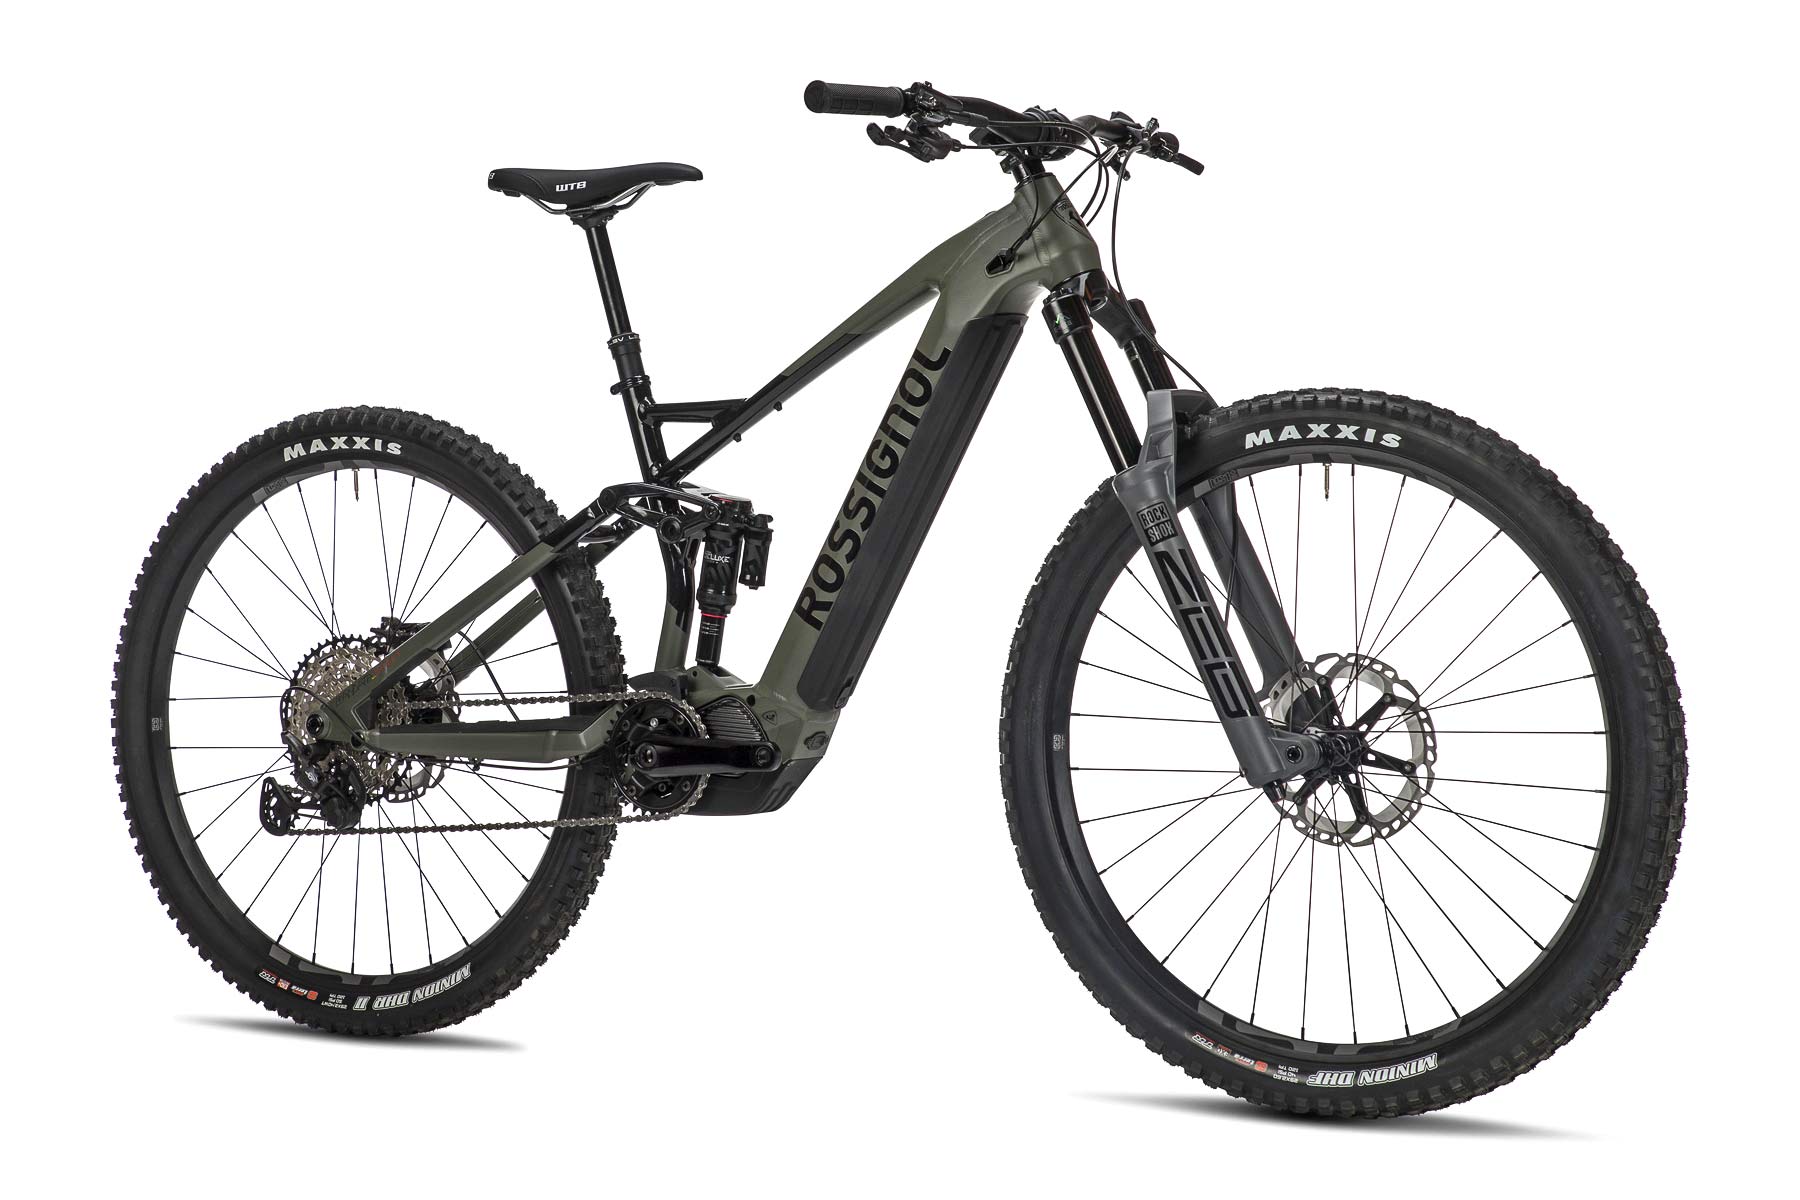 Affordable 2022 Rossignol alloy mountain bikes, Mandate Shift angled